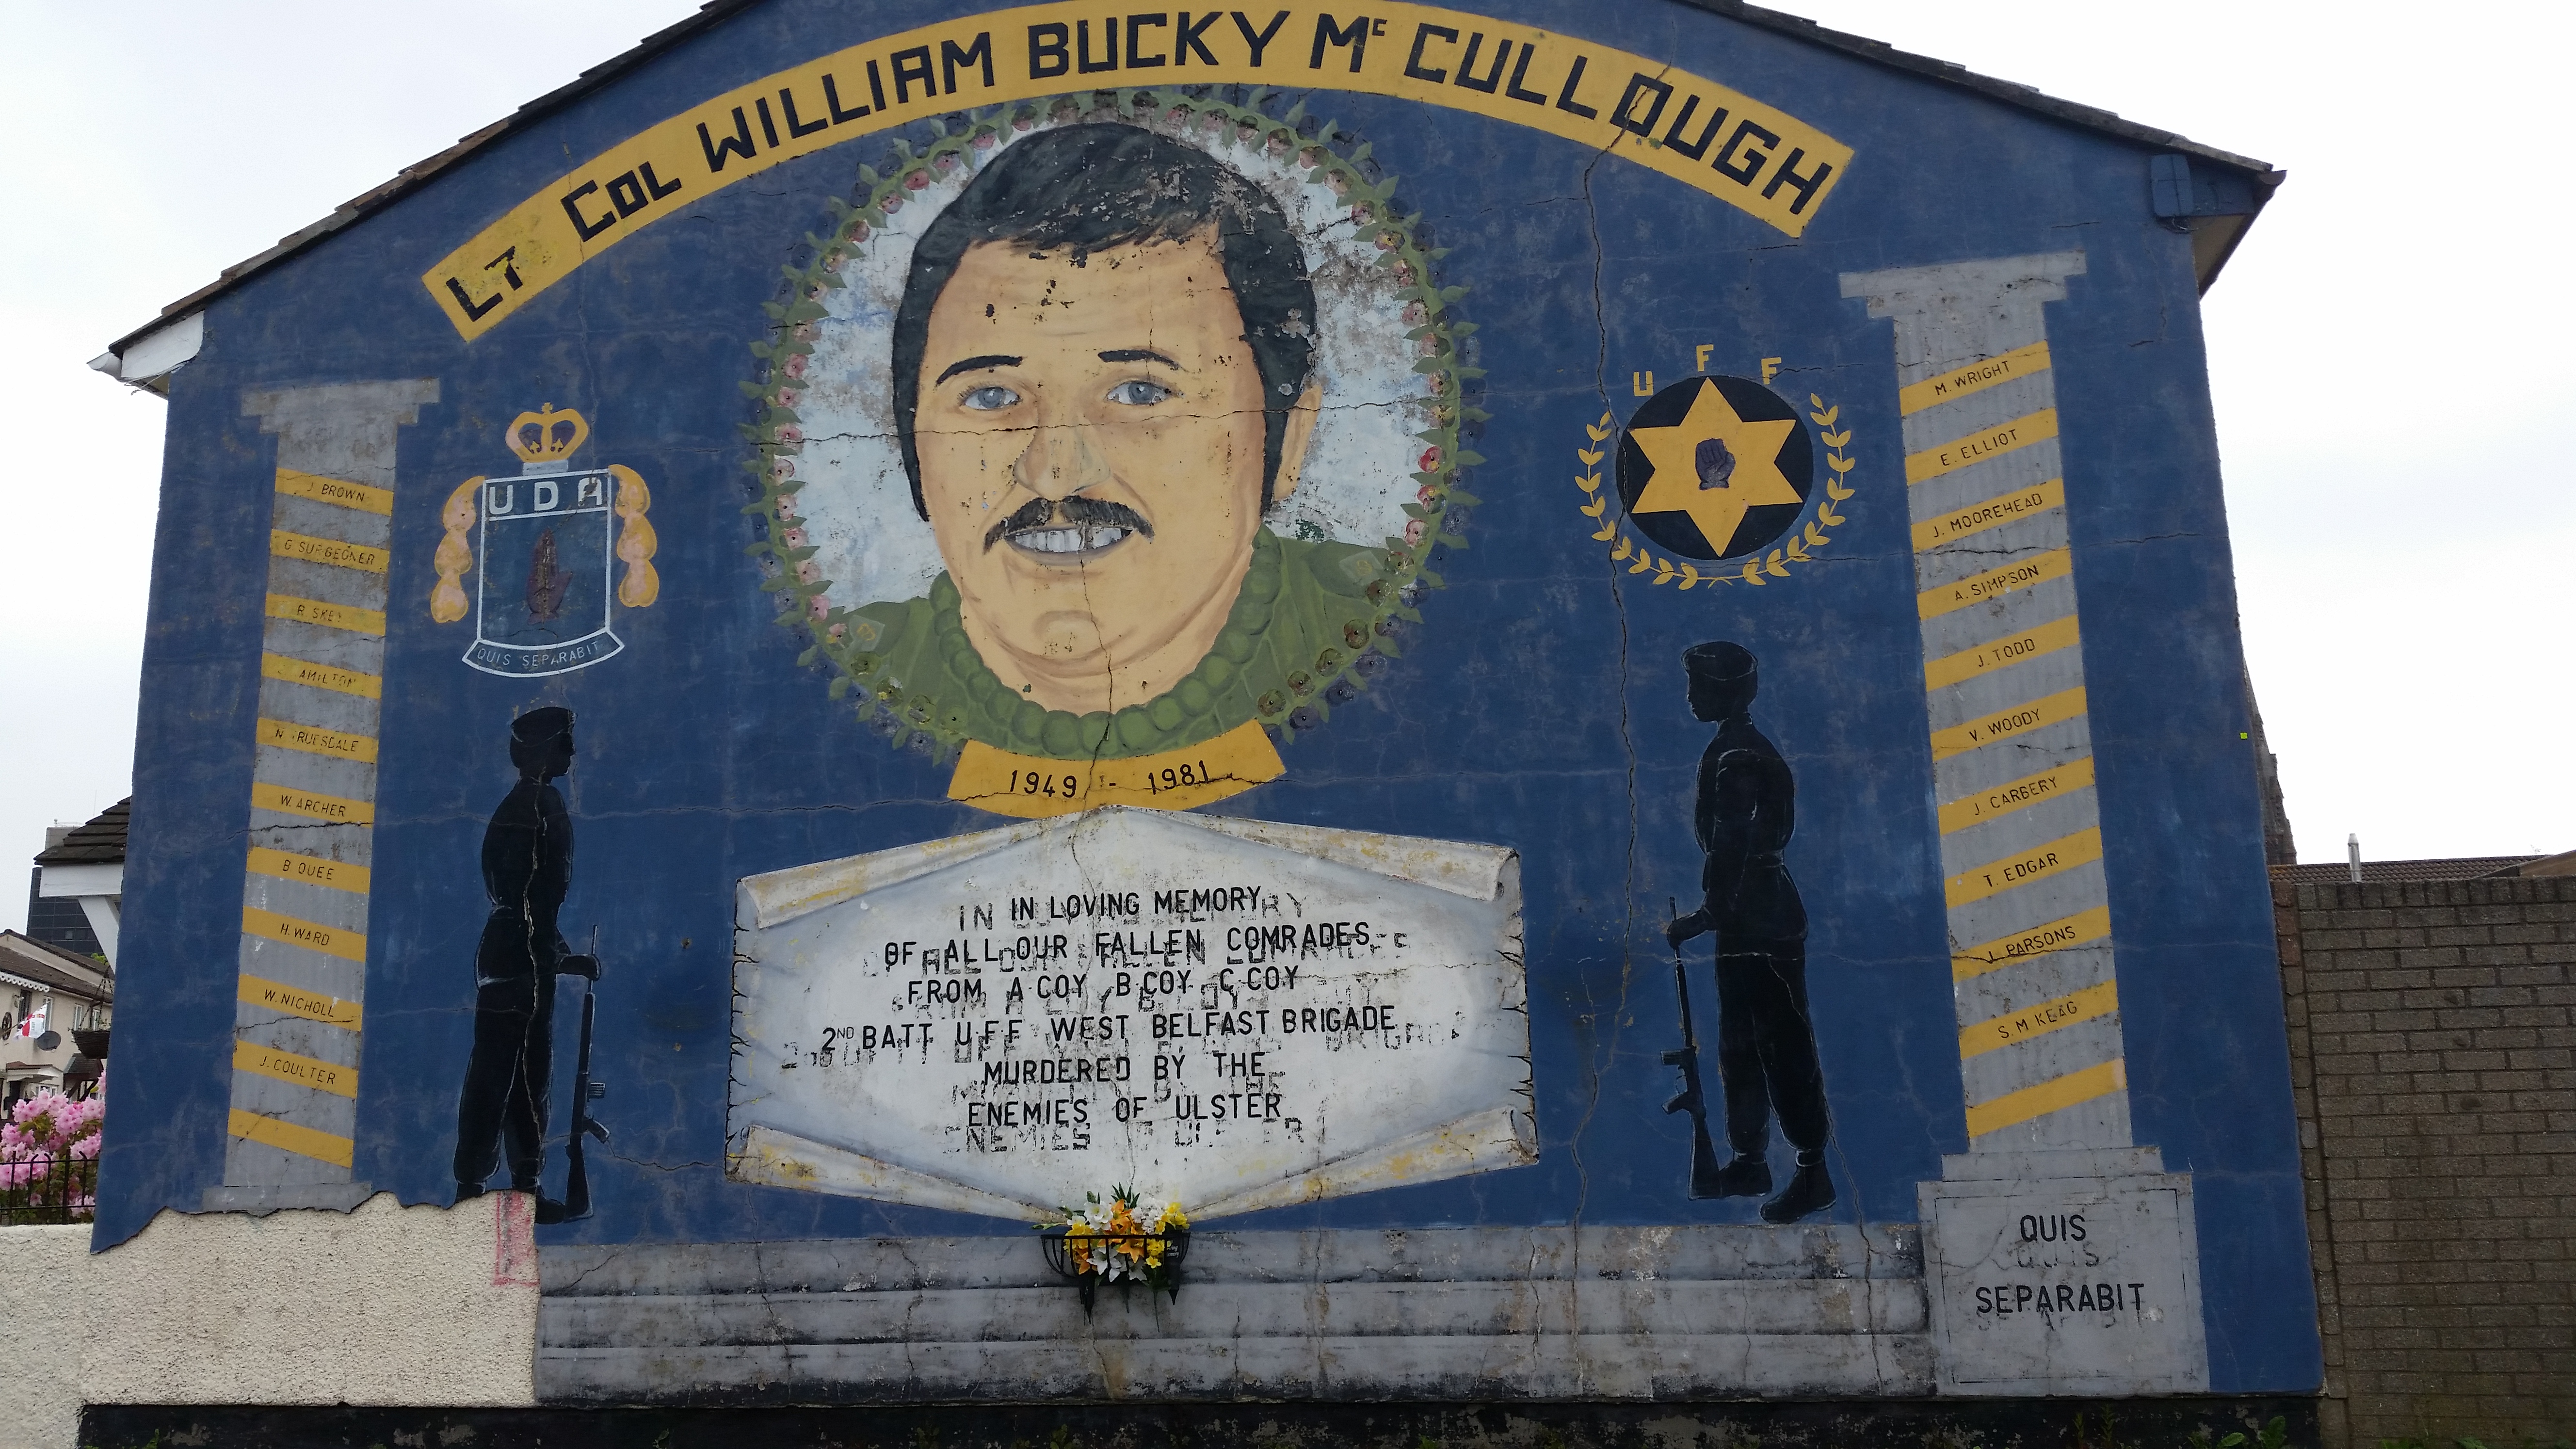 A Protestant/Loyalist Mural